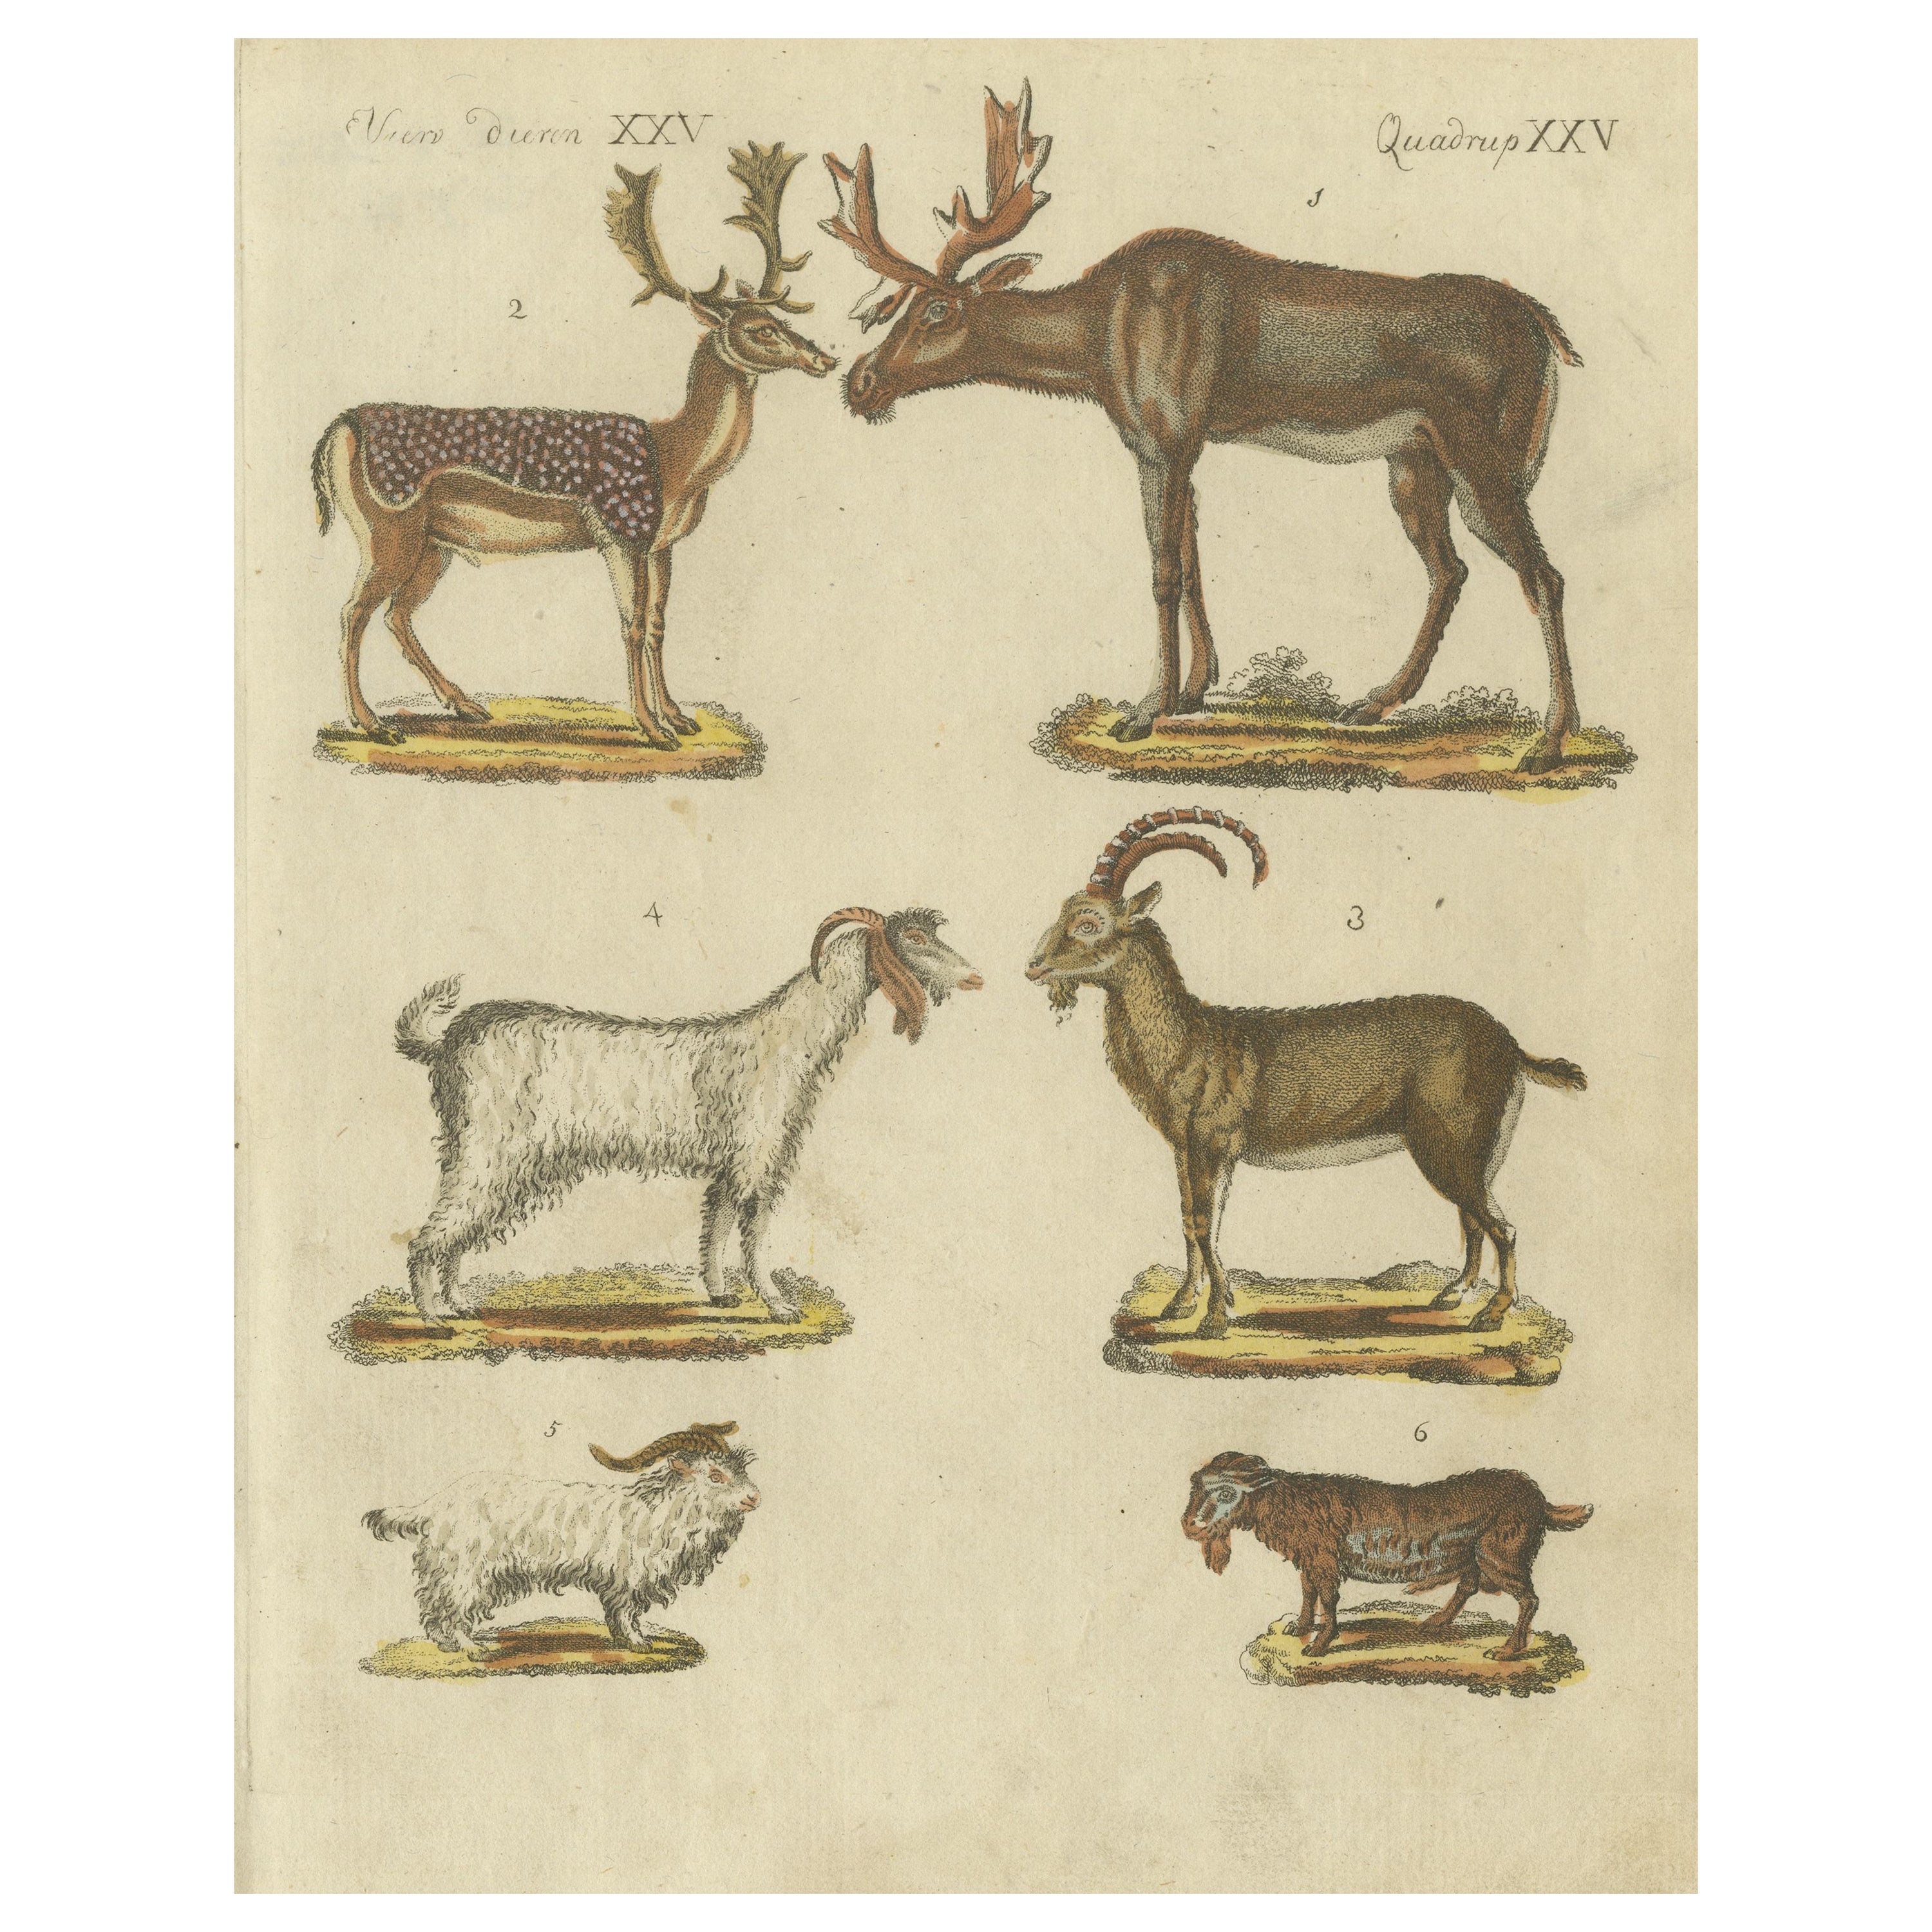 Hand Colored Antique Print of Deer, Billy Goats and Goats, circa 1820